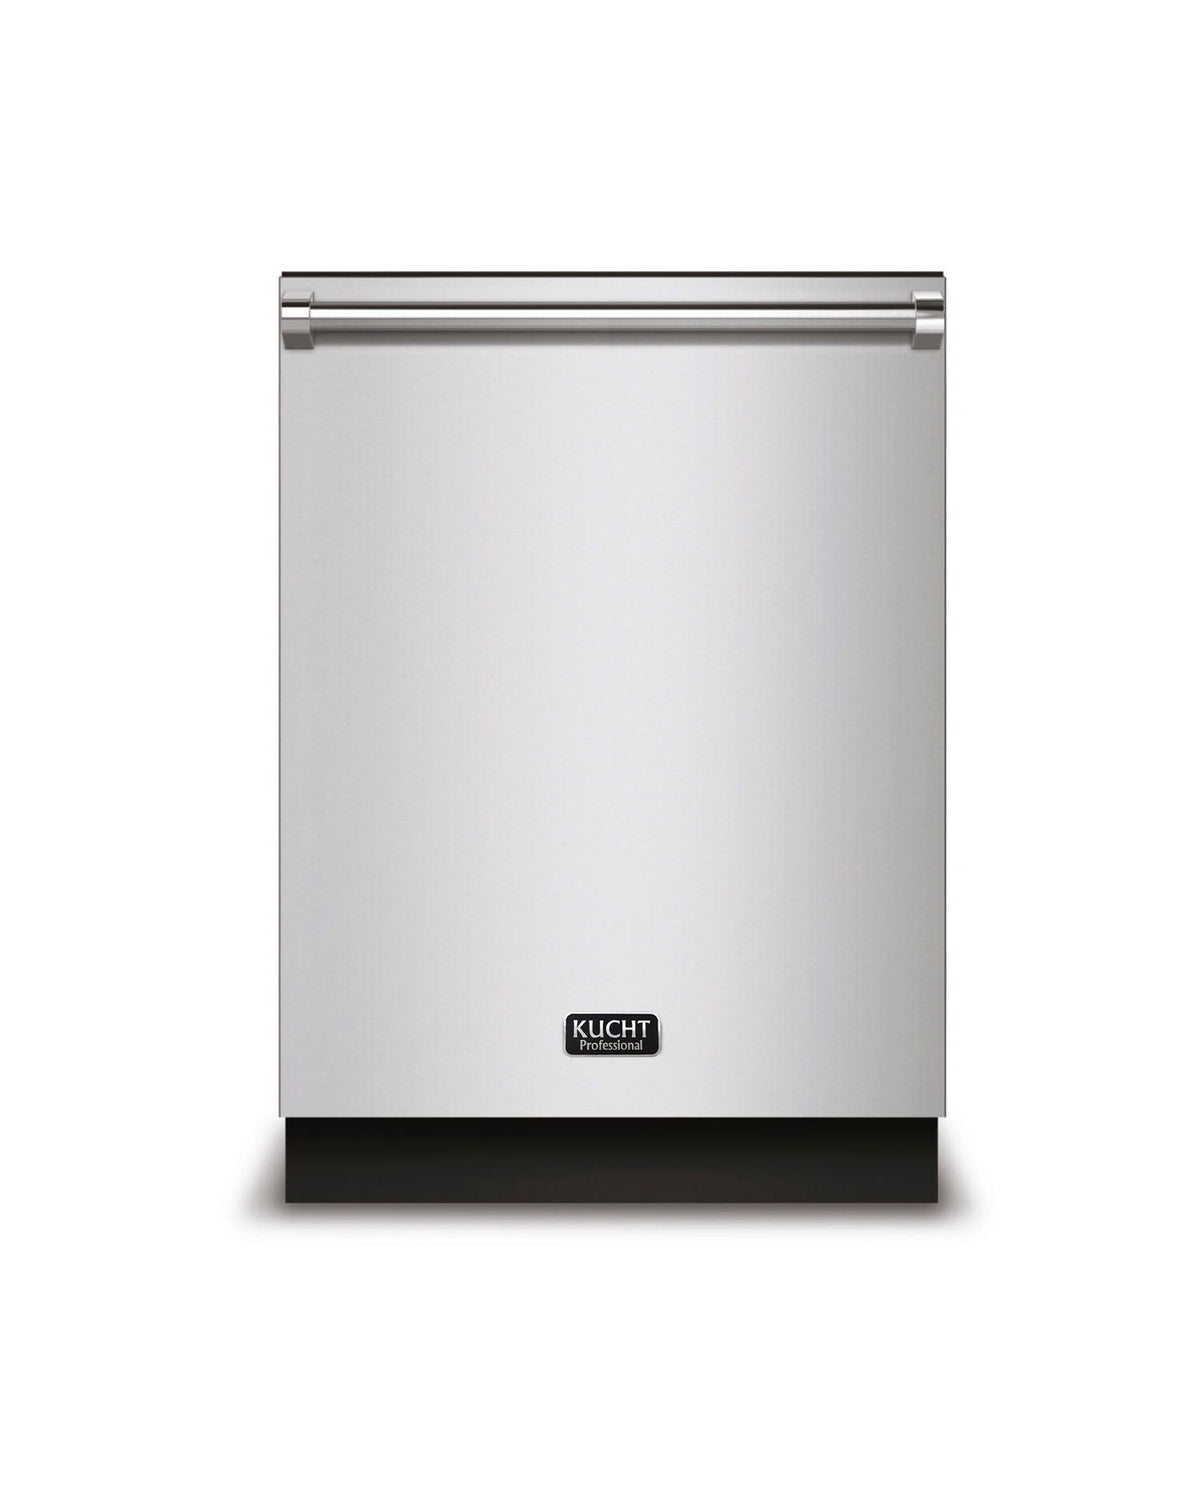 KUCHT K6502D 24″ Top Control Dishwasher in Stainless Steel with Stainless Steel Tub